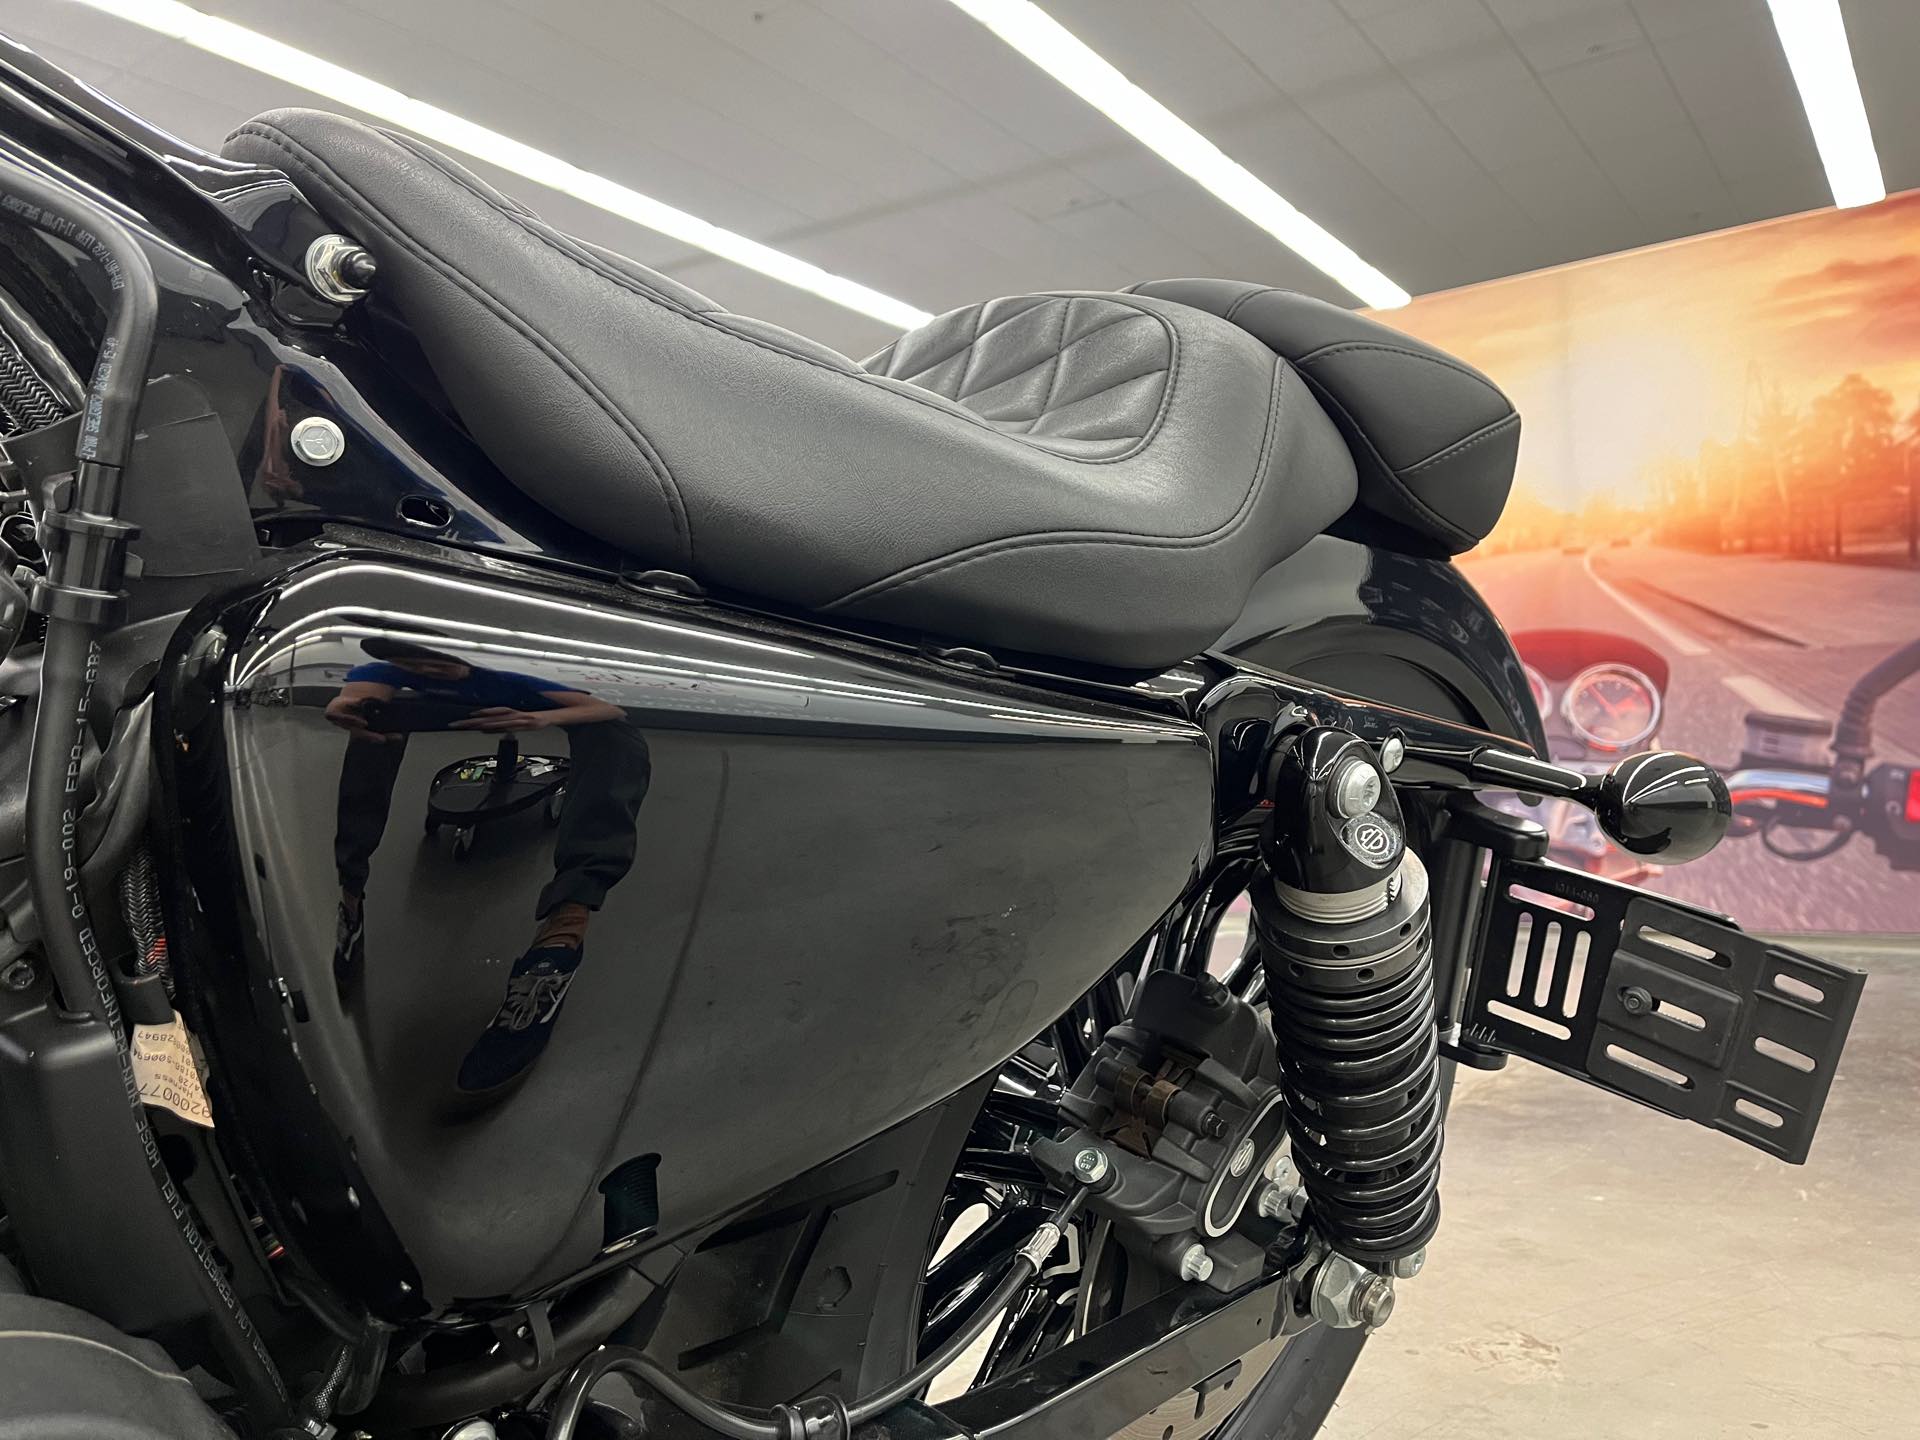 2021 Harley-Davidson Cruiser XL 1200X Forty-Eight at Aces Motorcycles - Denver